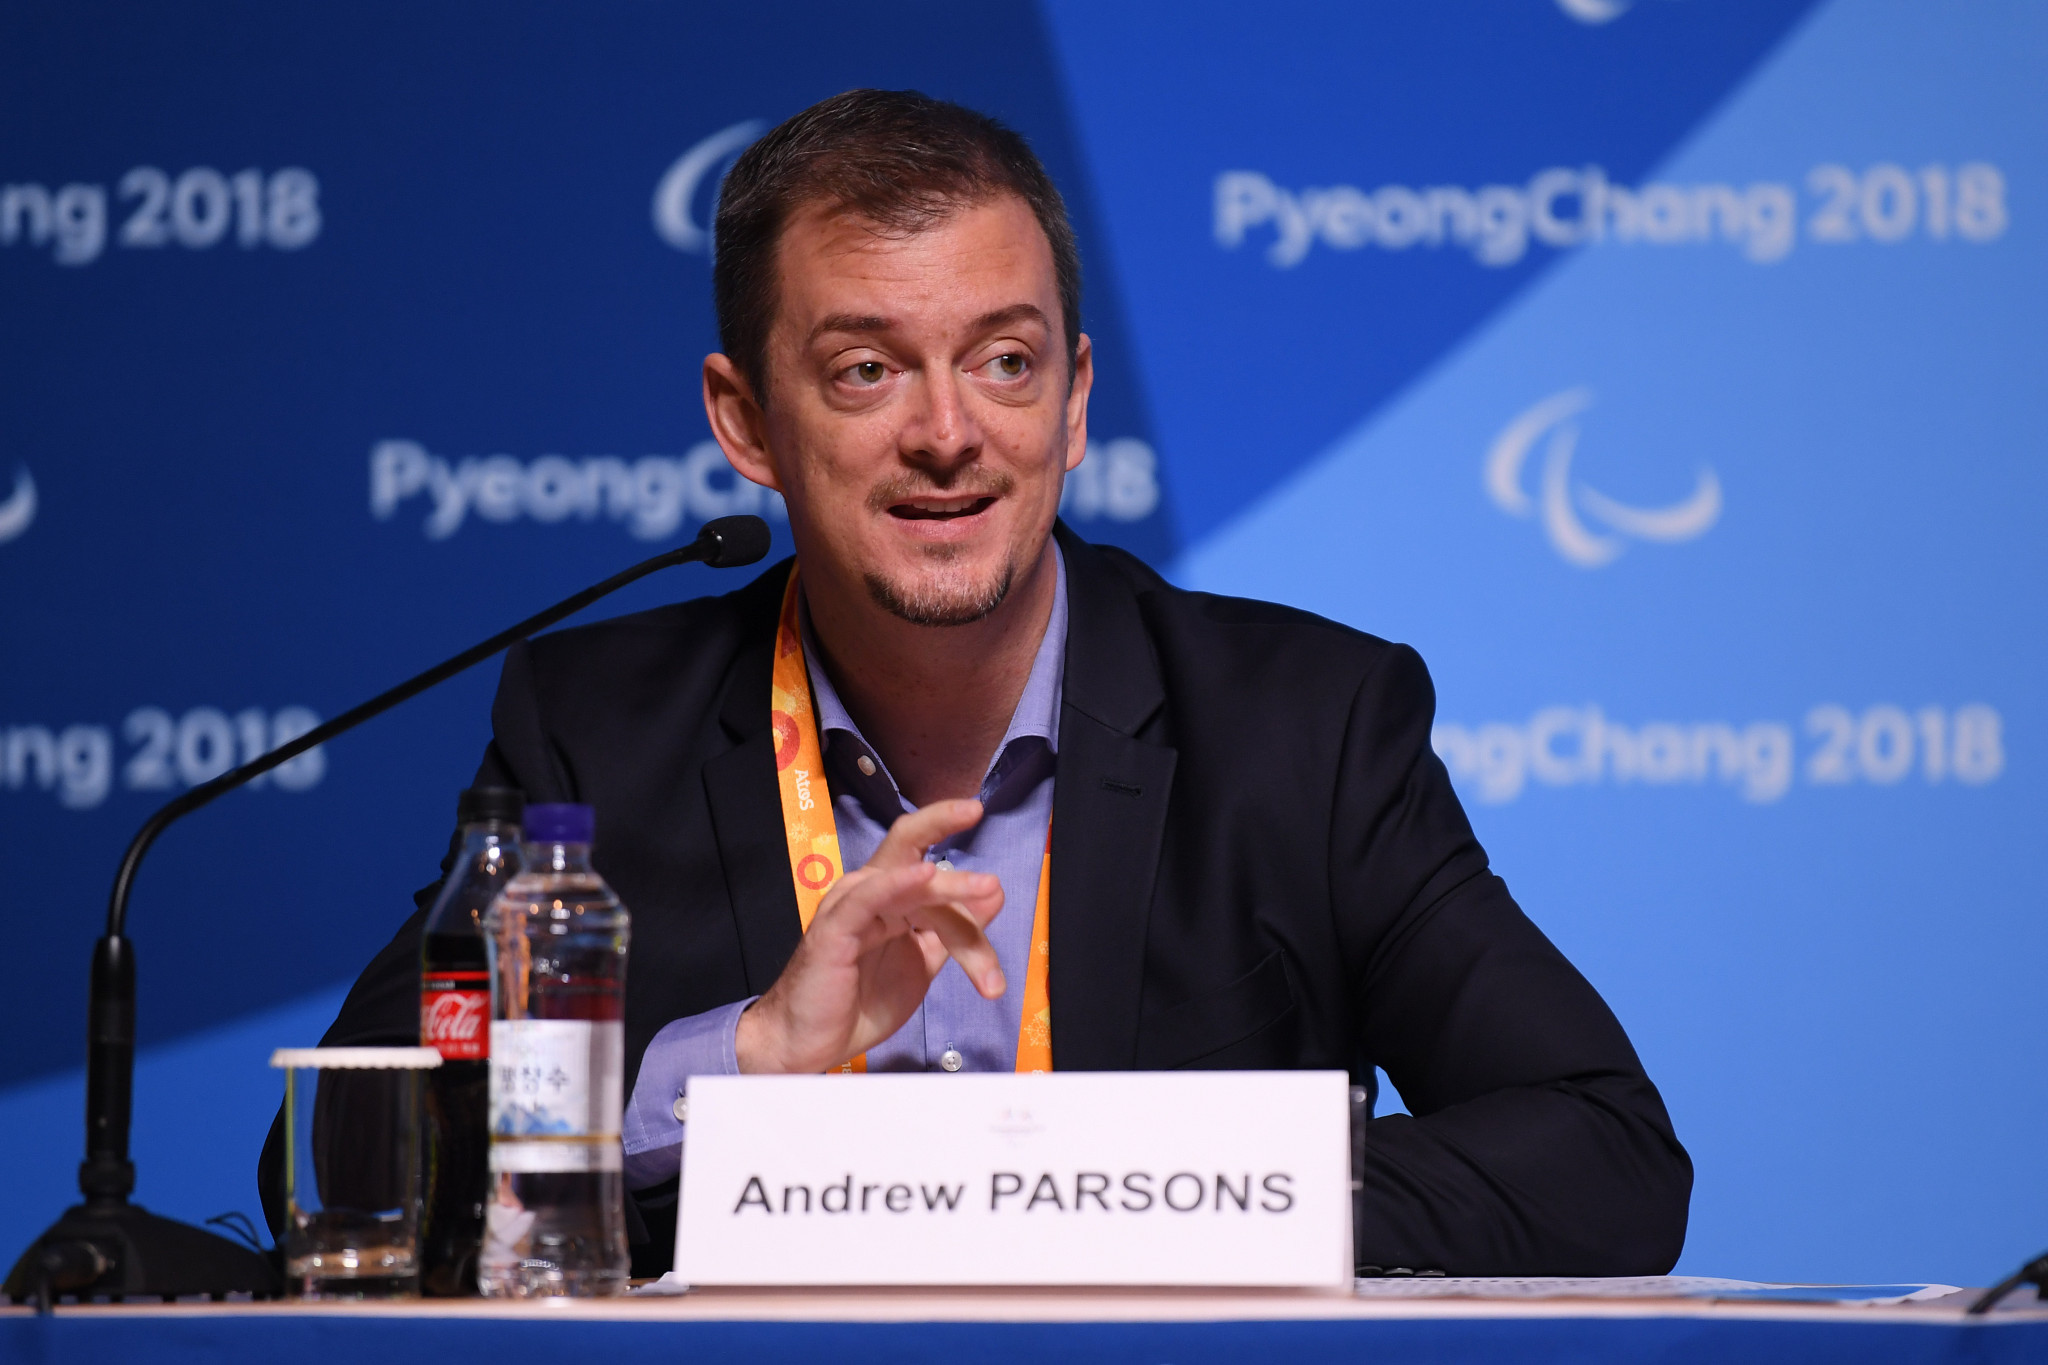 IPC President Andrew Parsons has insisted that the controversy surrounding classification will not be a distraction at Pyeongchang 2018 ©Getty Images